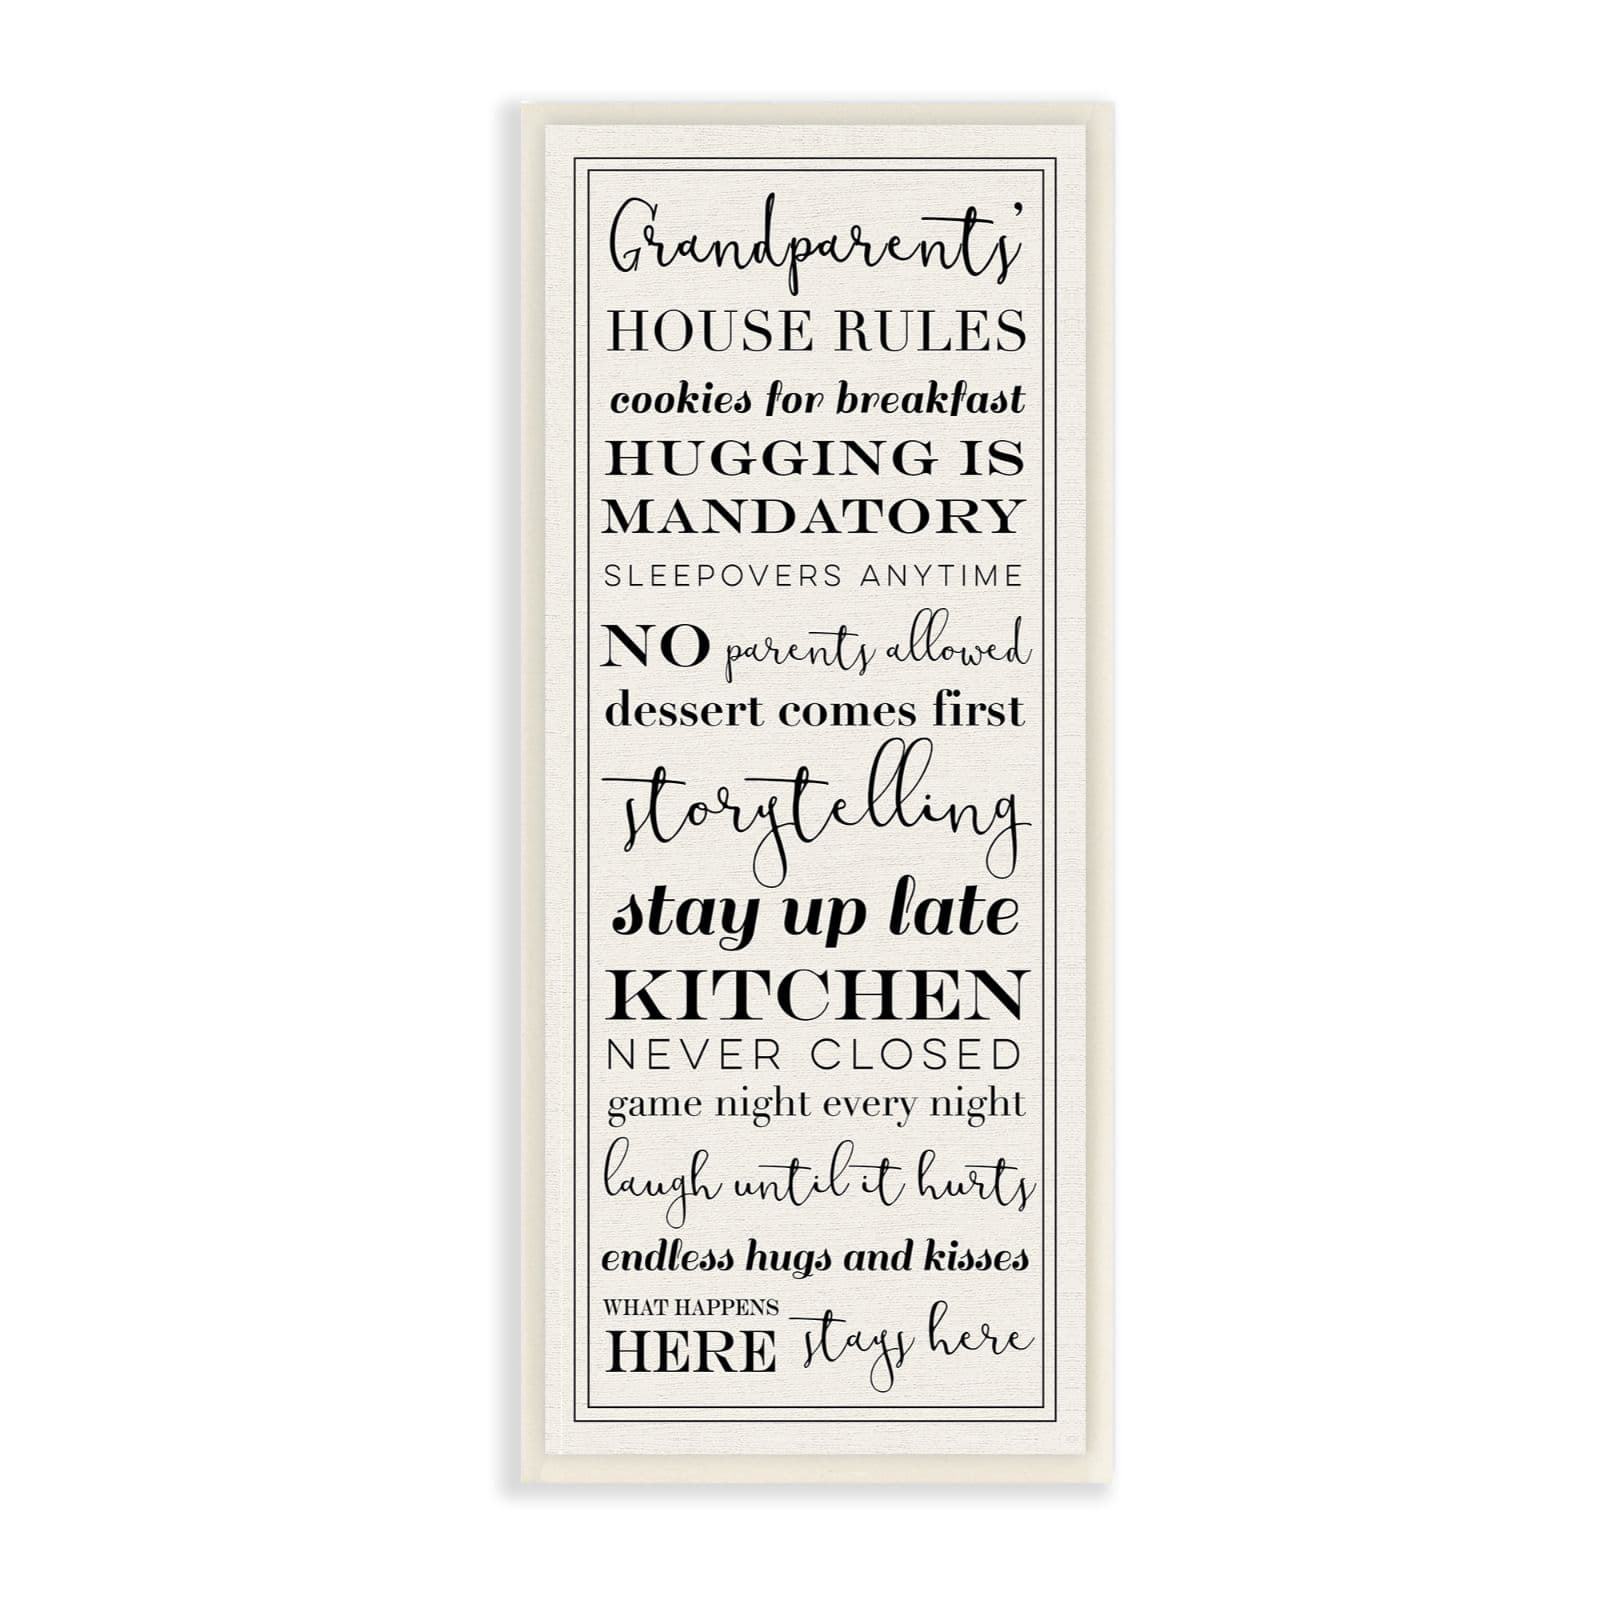 Grandparents House Rules Inspirational Wooden Decorative Wall Art Plaque 